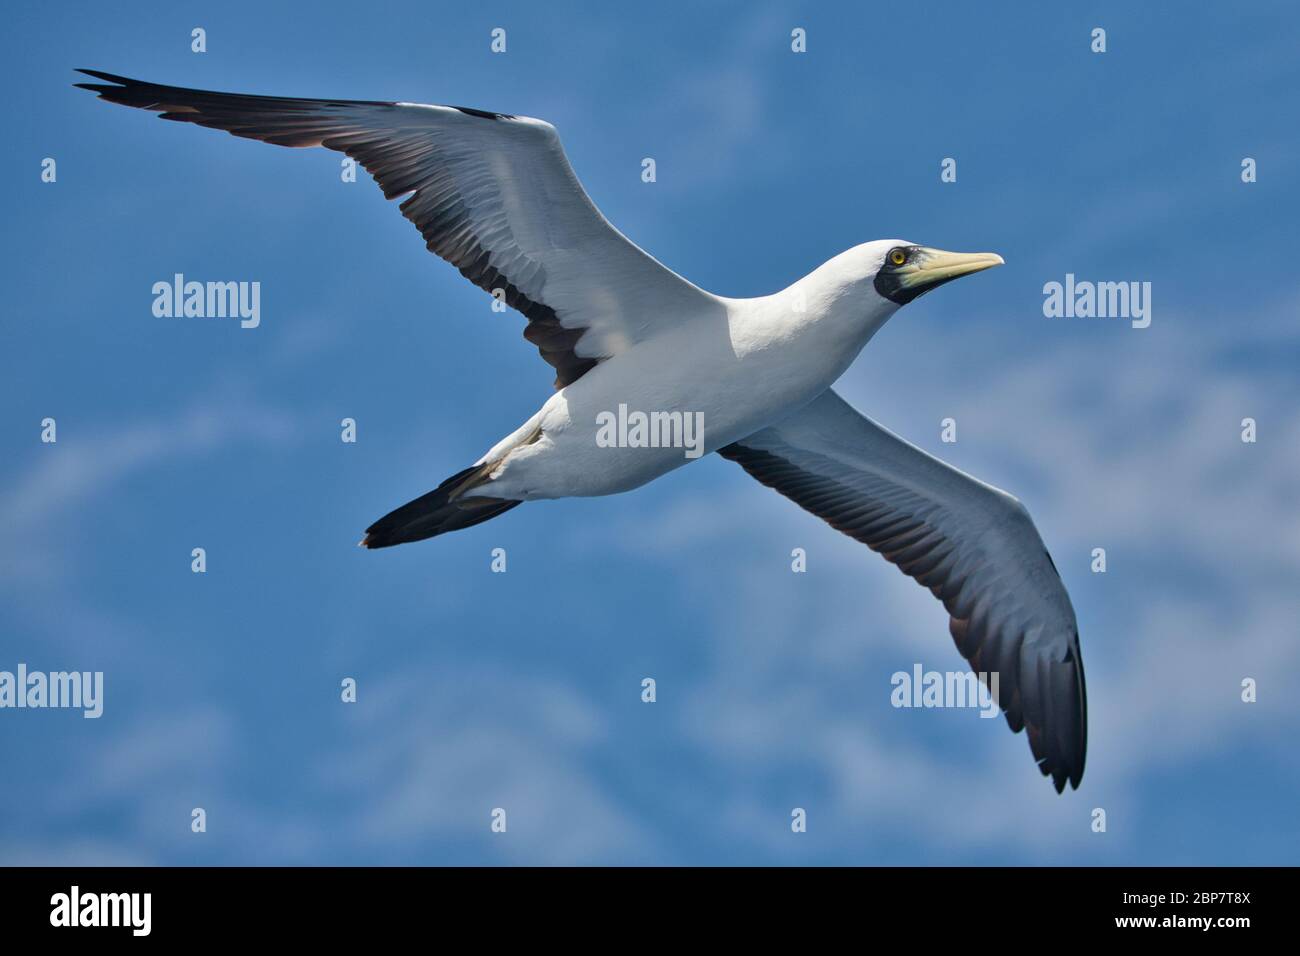 A Masked Booby bird in flight overhead seen in the Caribbean Sea. Wings spread out fully with a blue sky background Stock Photo